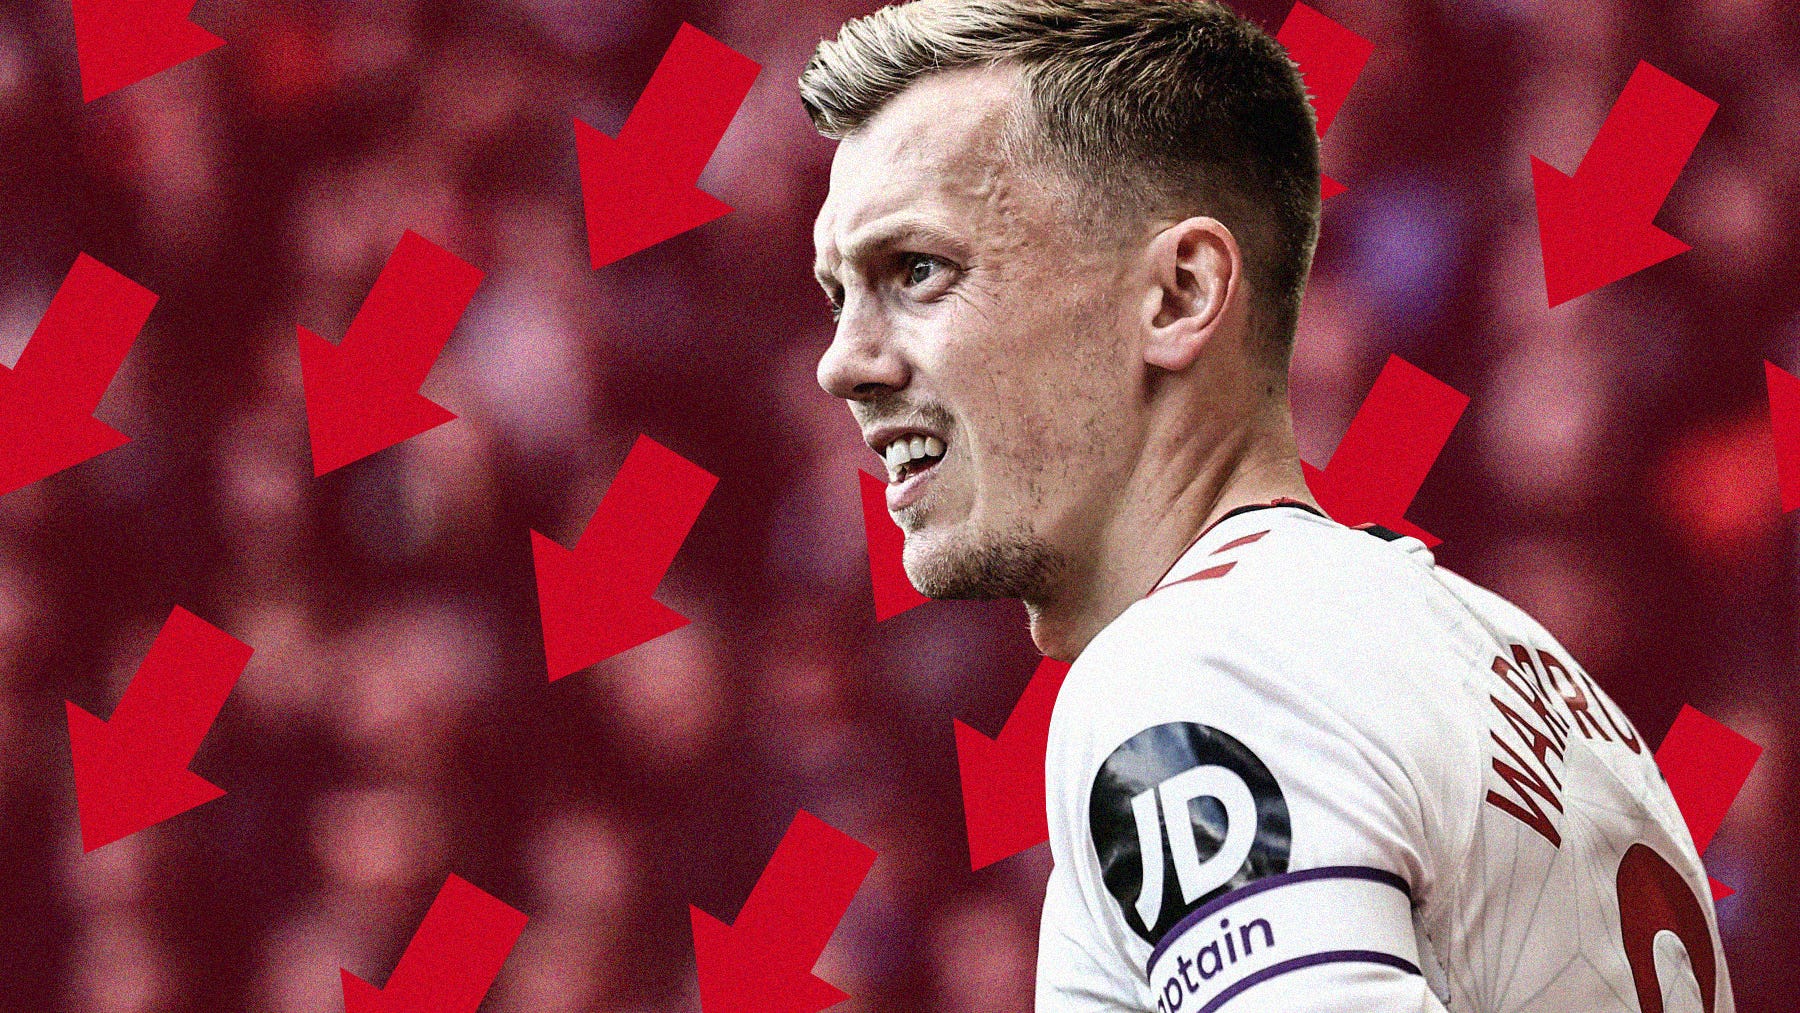 A close-up photo of Southampton's James Ward-Prowse set against a red background with multiple red arrows pointing downward